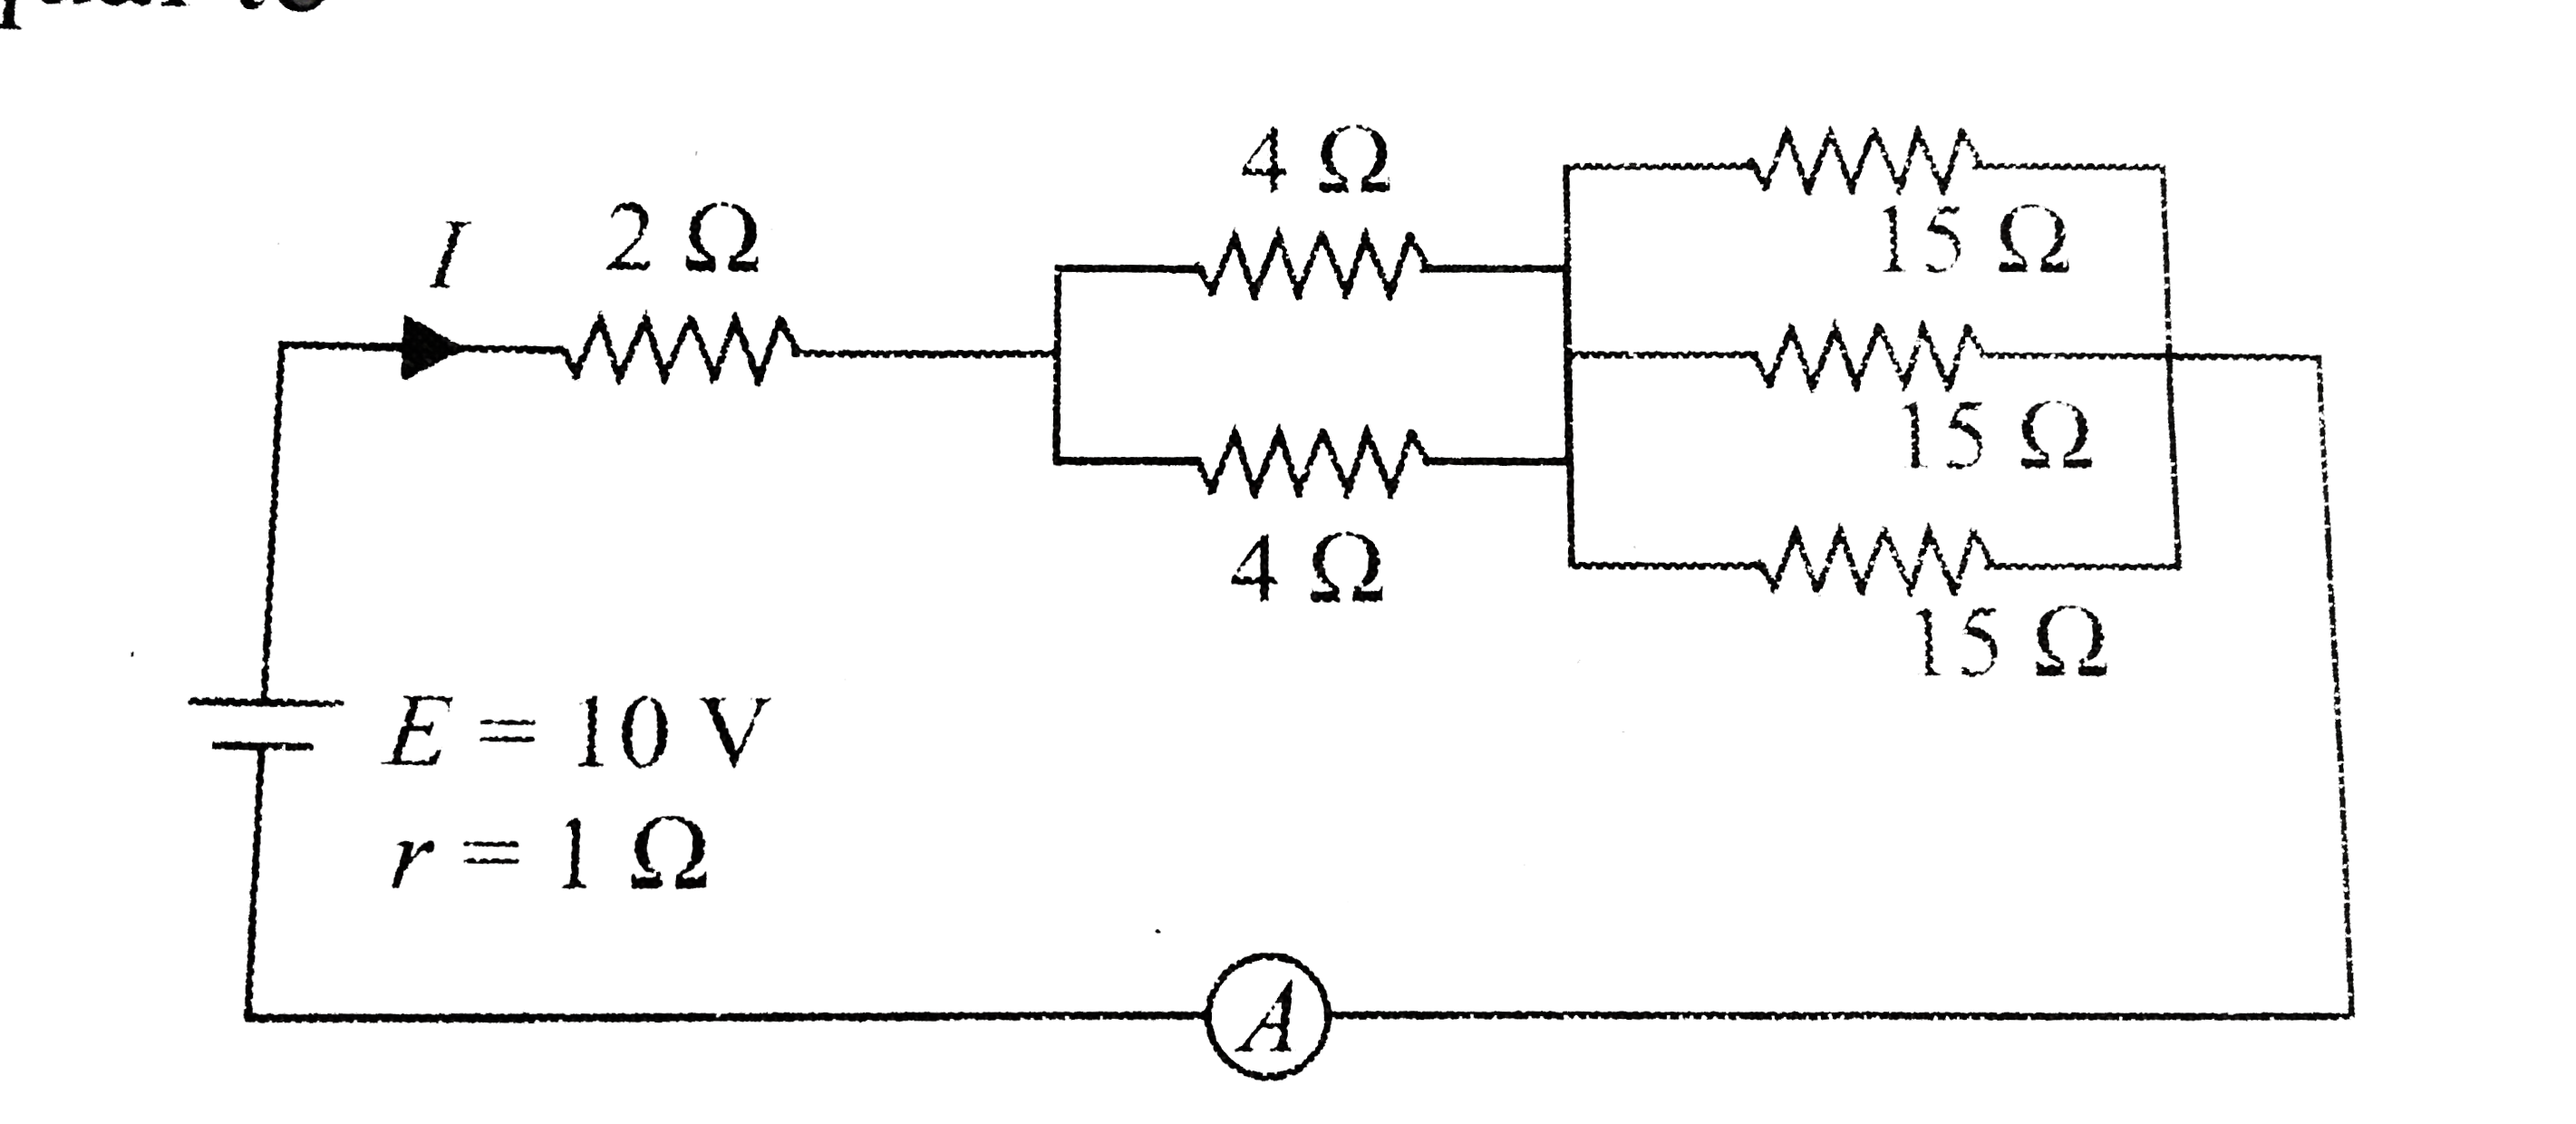 In the circuit shwon in fig. the current I has  a value equal to